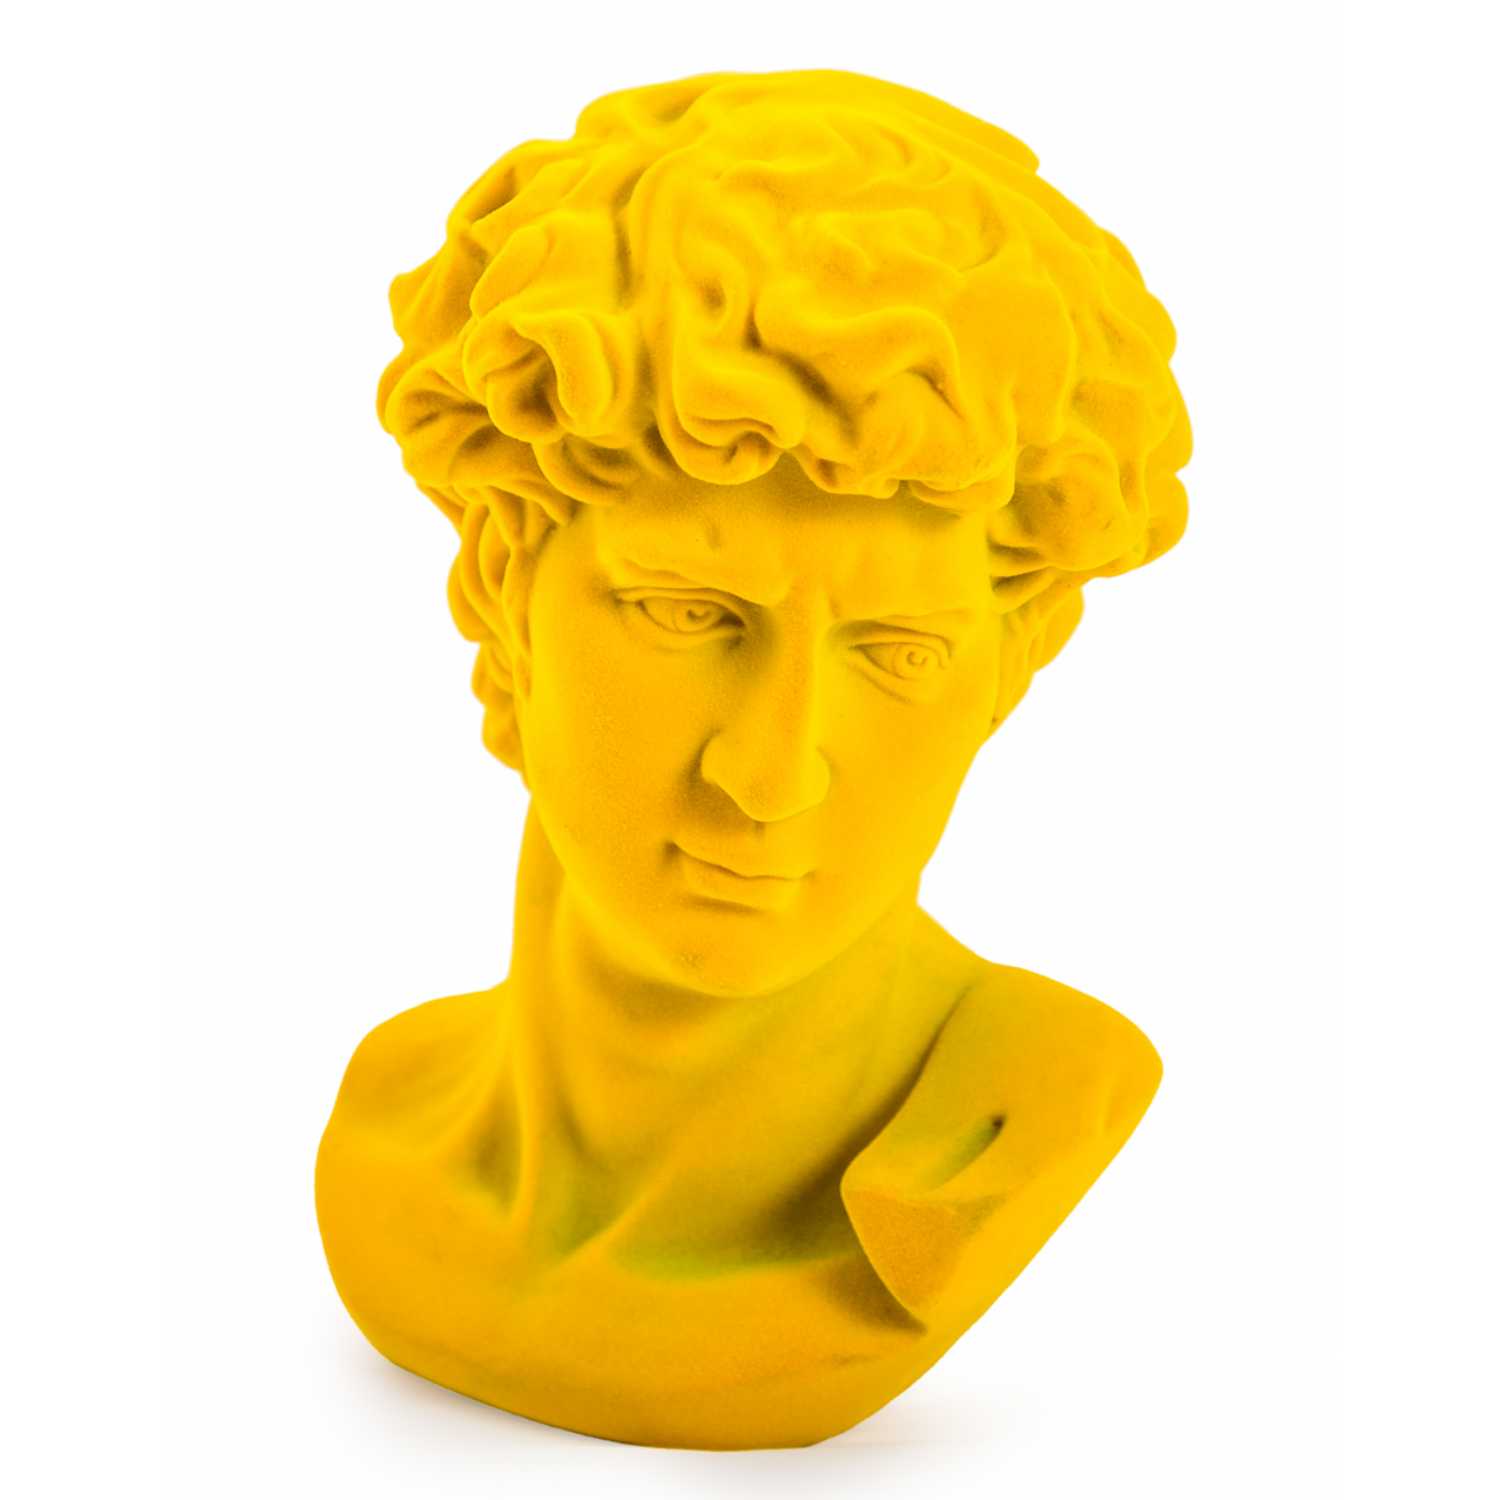 &Quirky Bright Yellow Large David Flock Bust